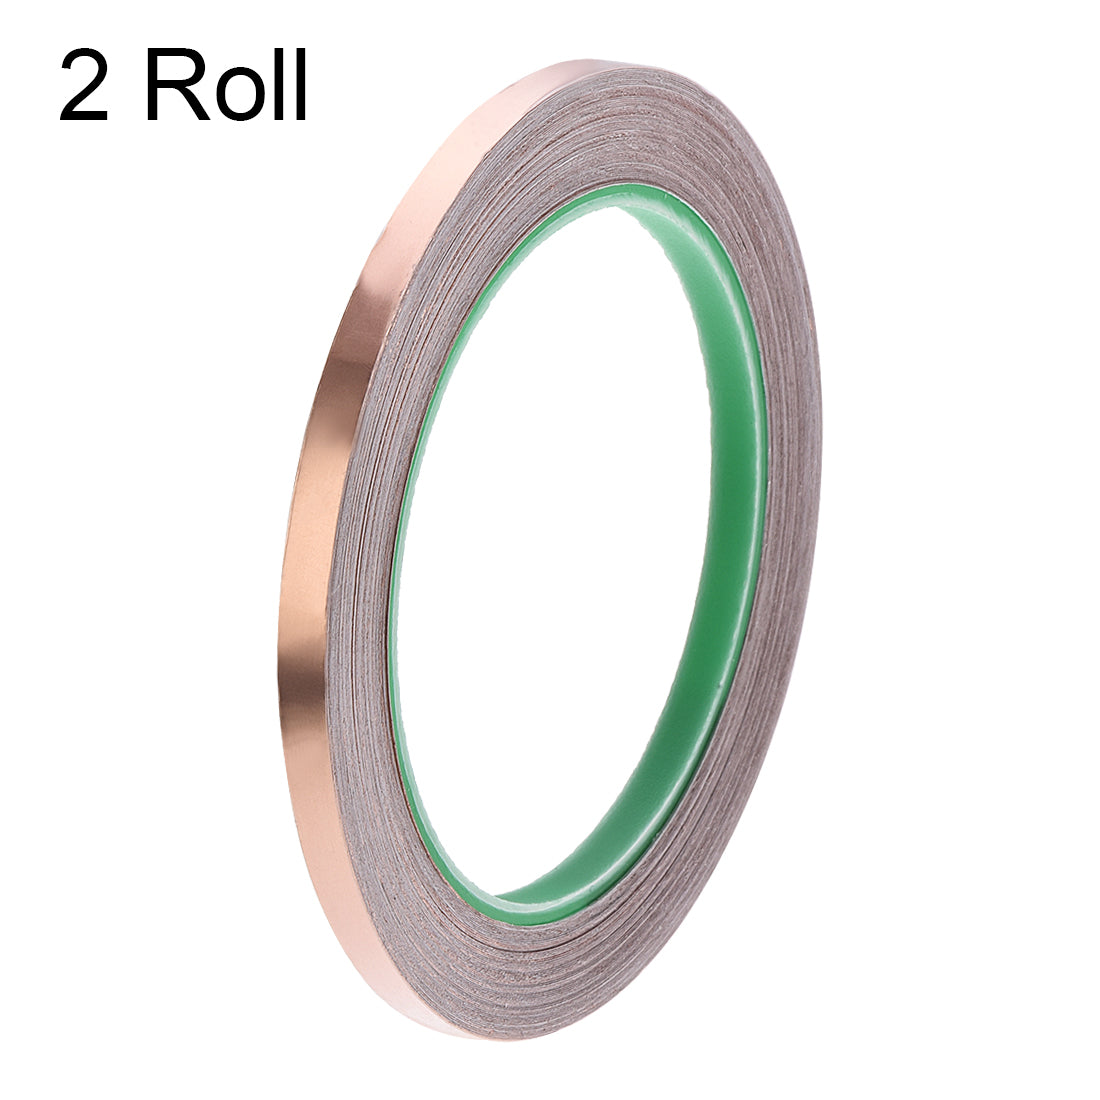 uxcell Uxcell Double Sided Conductive Tape Copper Foil Tape 6mm x 20m for EMI Shielding 2 Roll